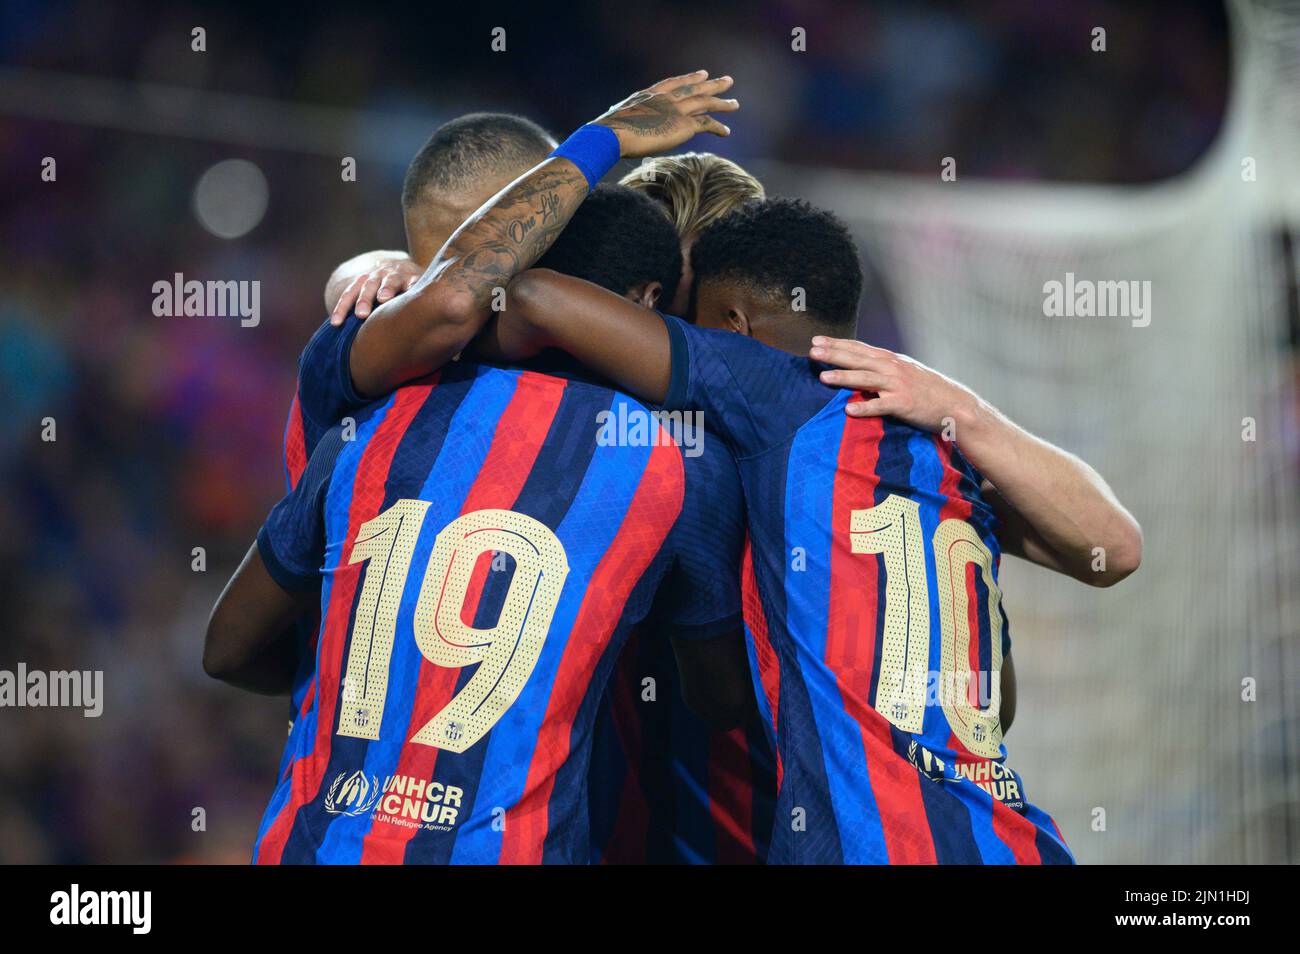 Pierre-Emerick Aubameyang of FC Barcelona celebrate a goal during the Joan Gamper Trophy match between FC Barcelona and Pumas UNAM at Camp Nou in Barcelona, Spain. Stock Photo